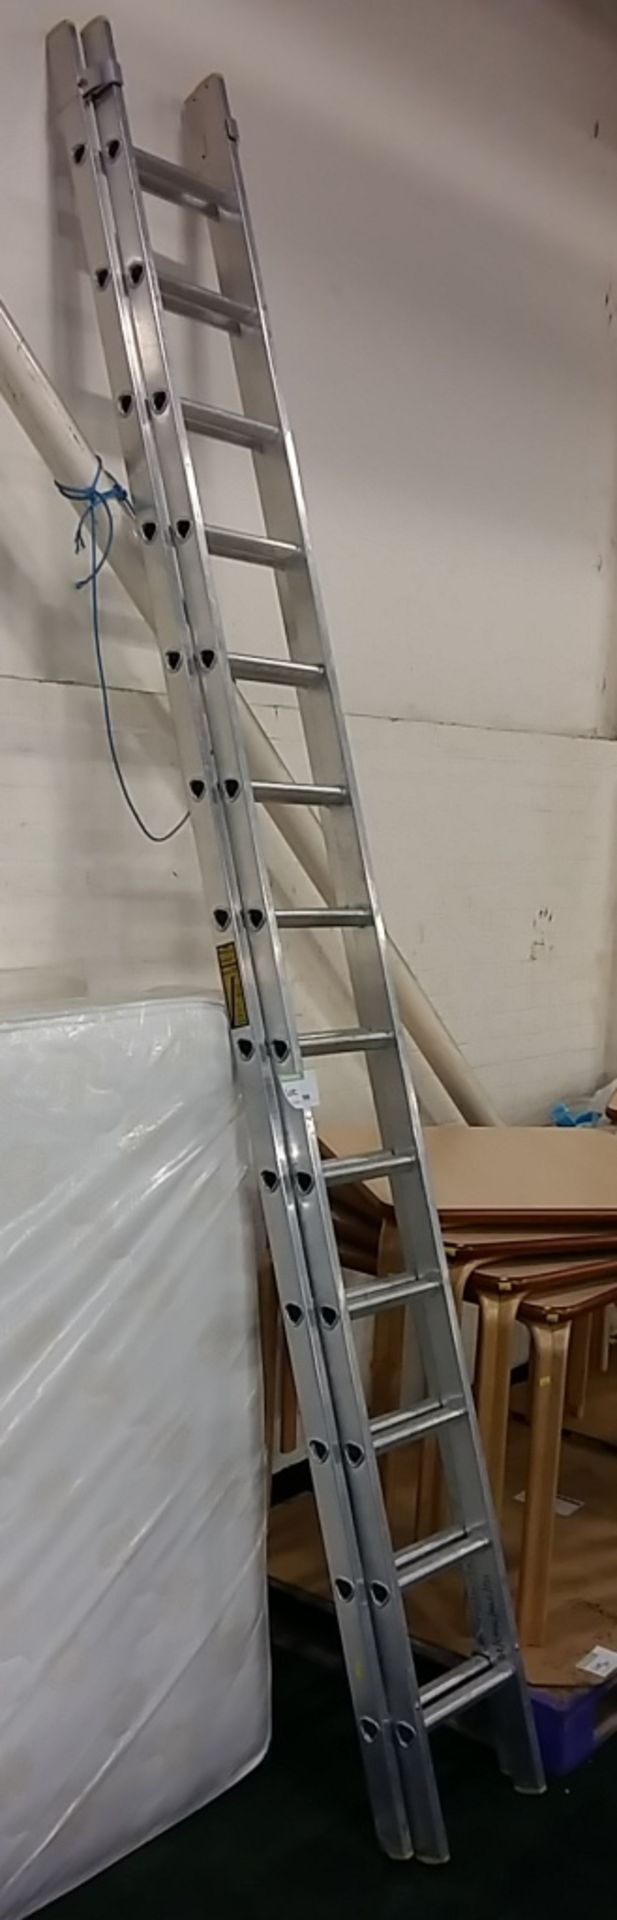 2 Section ladder